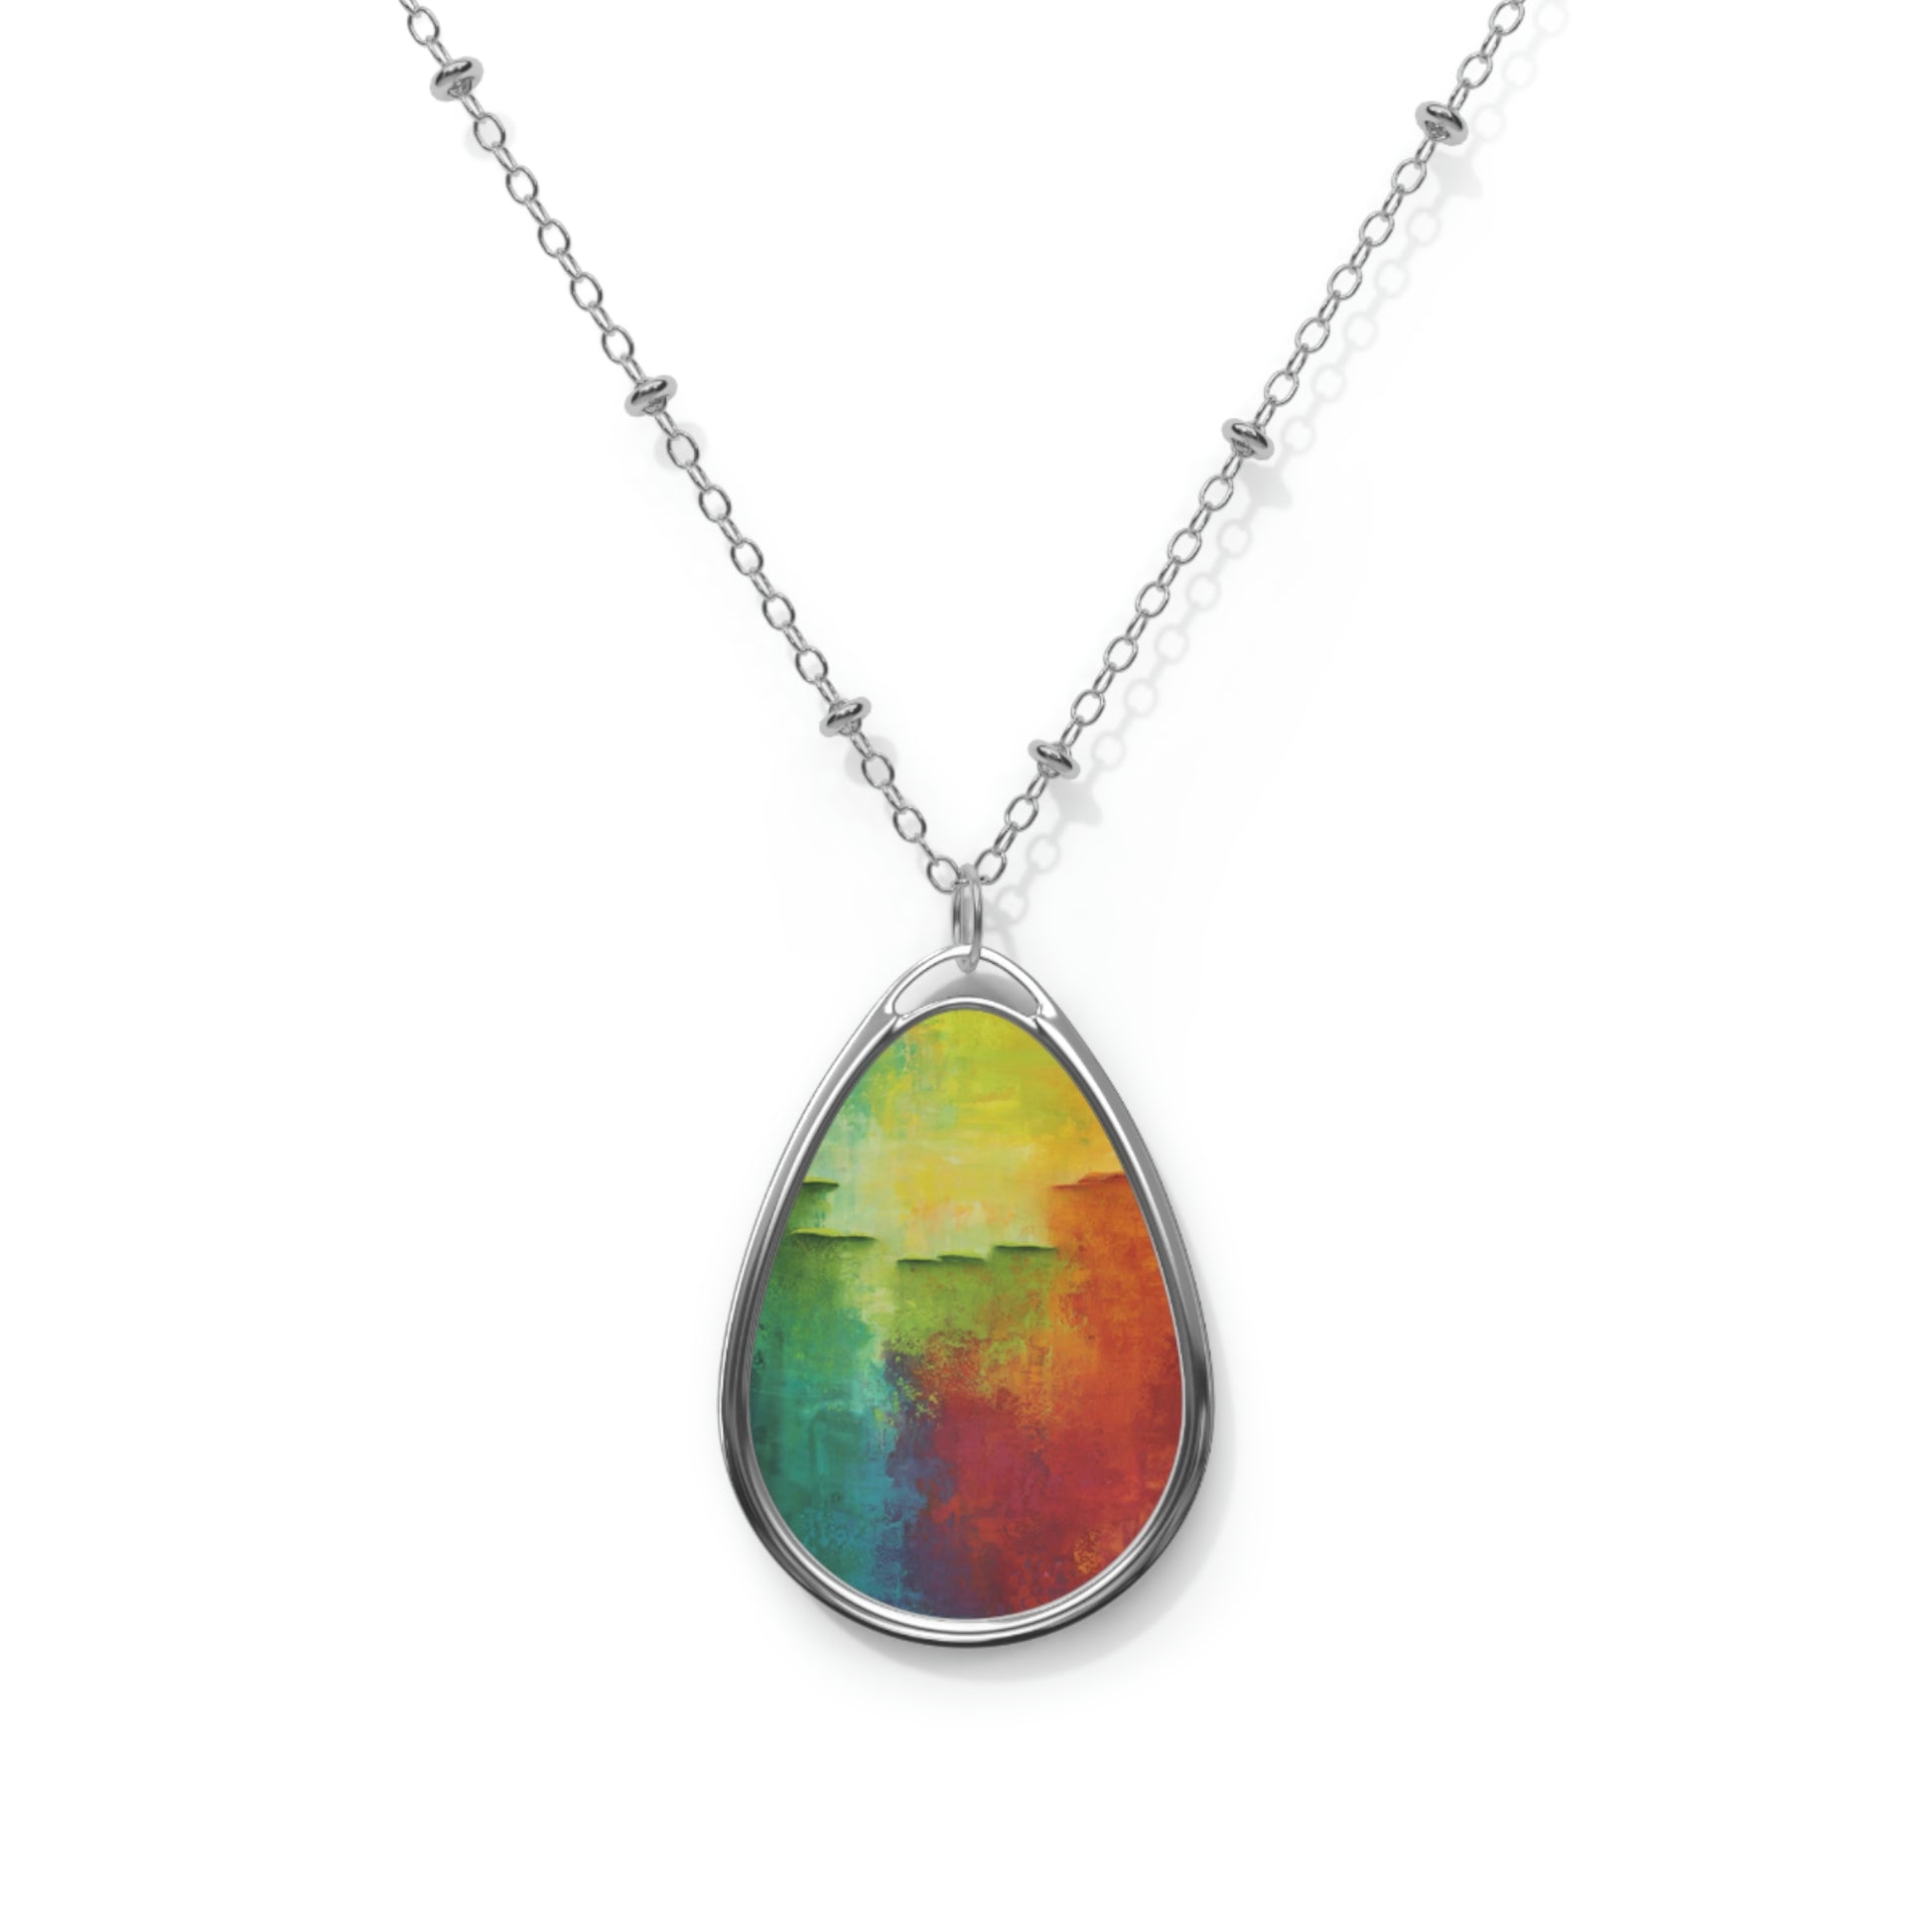 Pride Art Necklace - Be Yourself rainbow color art on a silver necklace